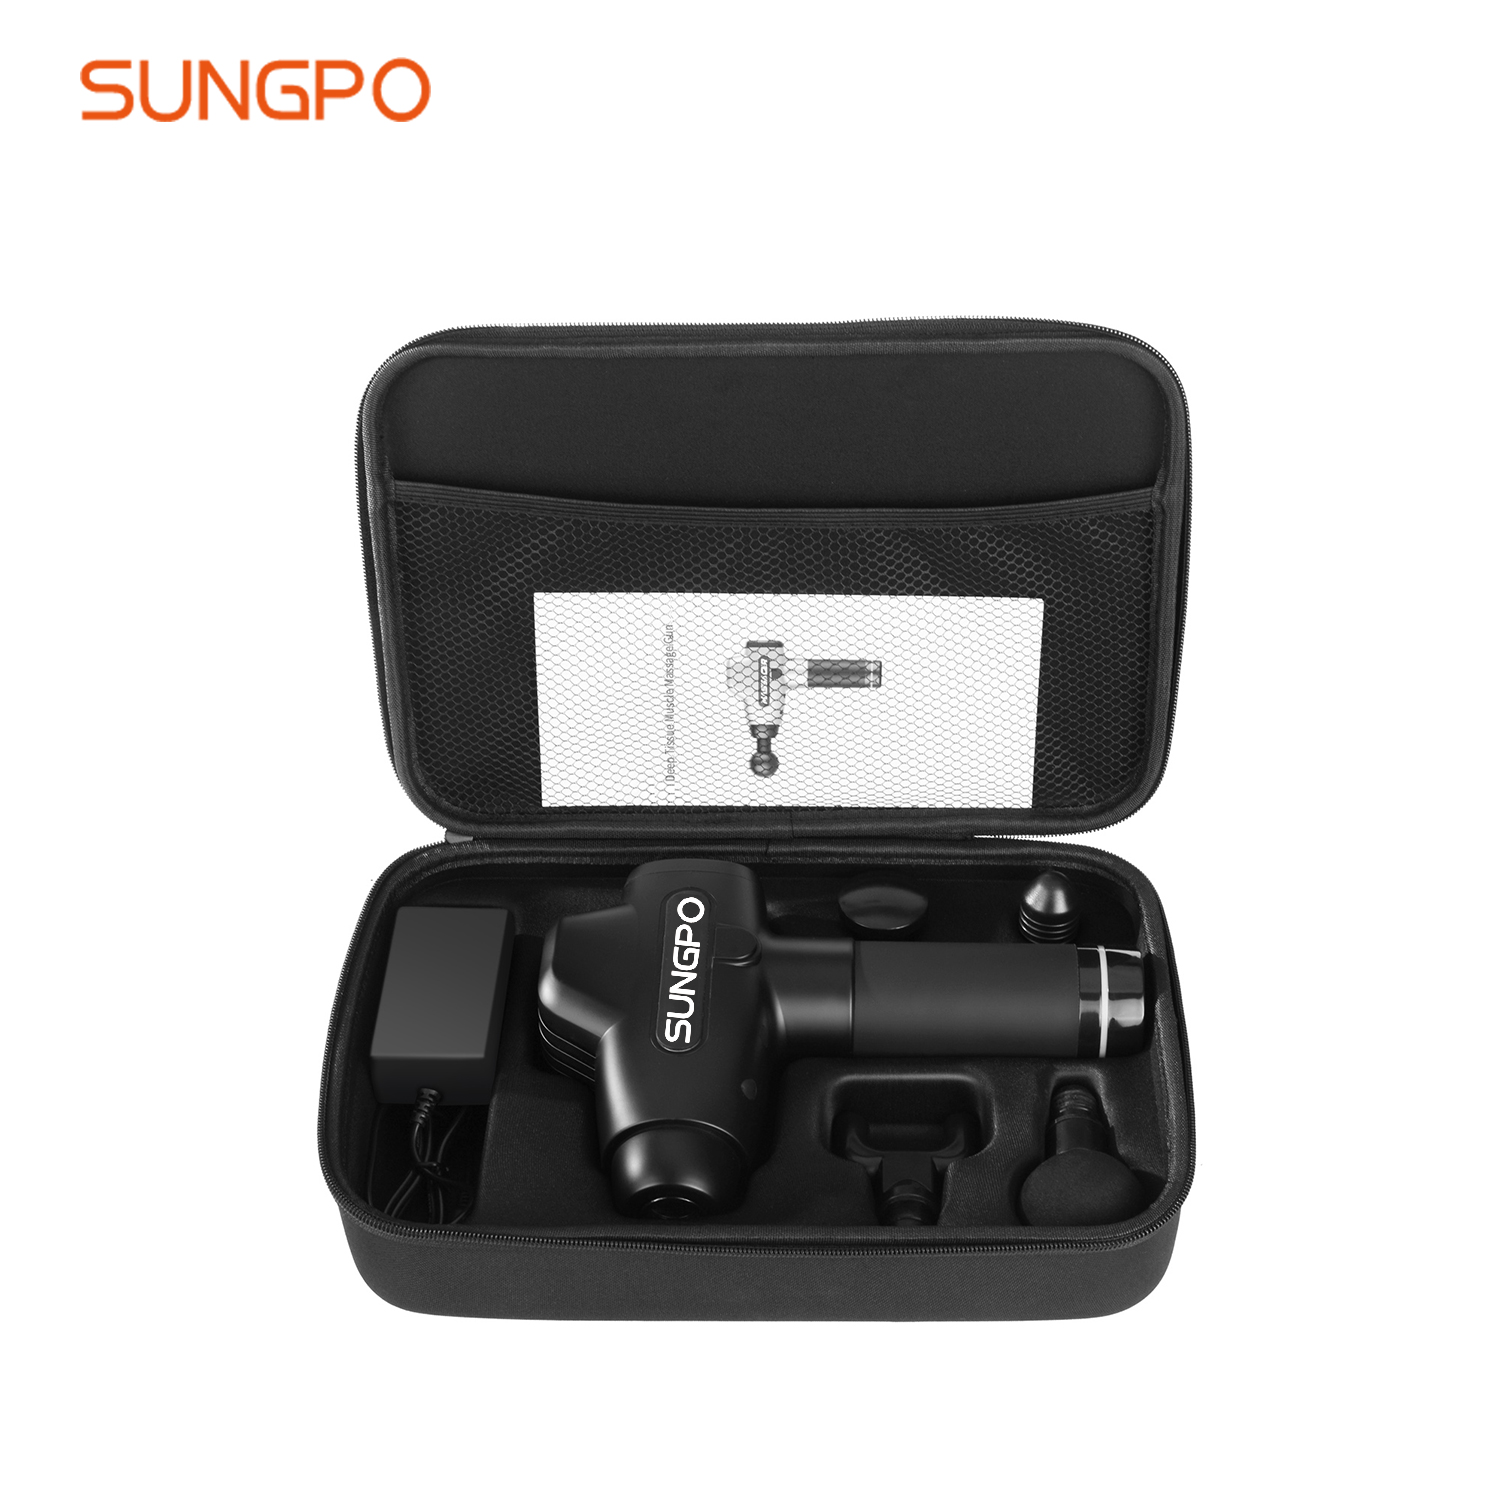 SUNGPO smart hypervolt percussion massager factory direct supply for sports injuries-1